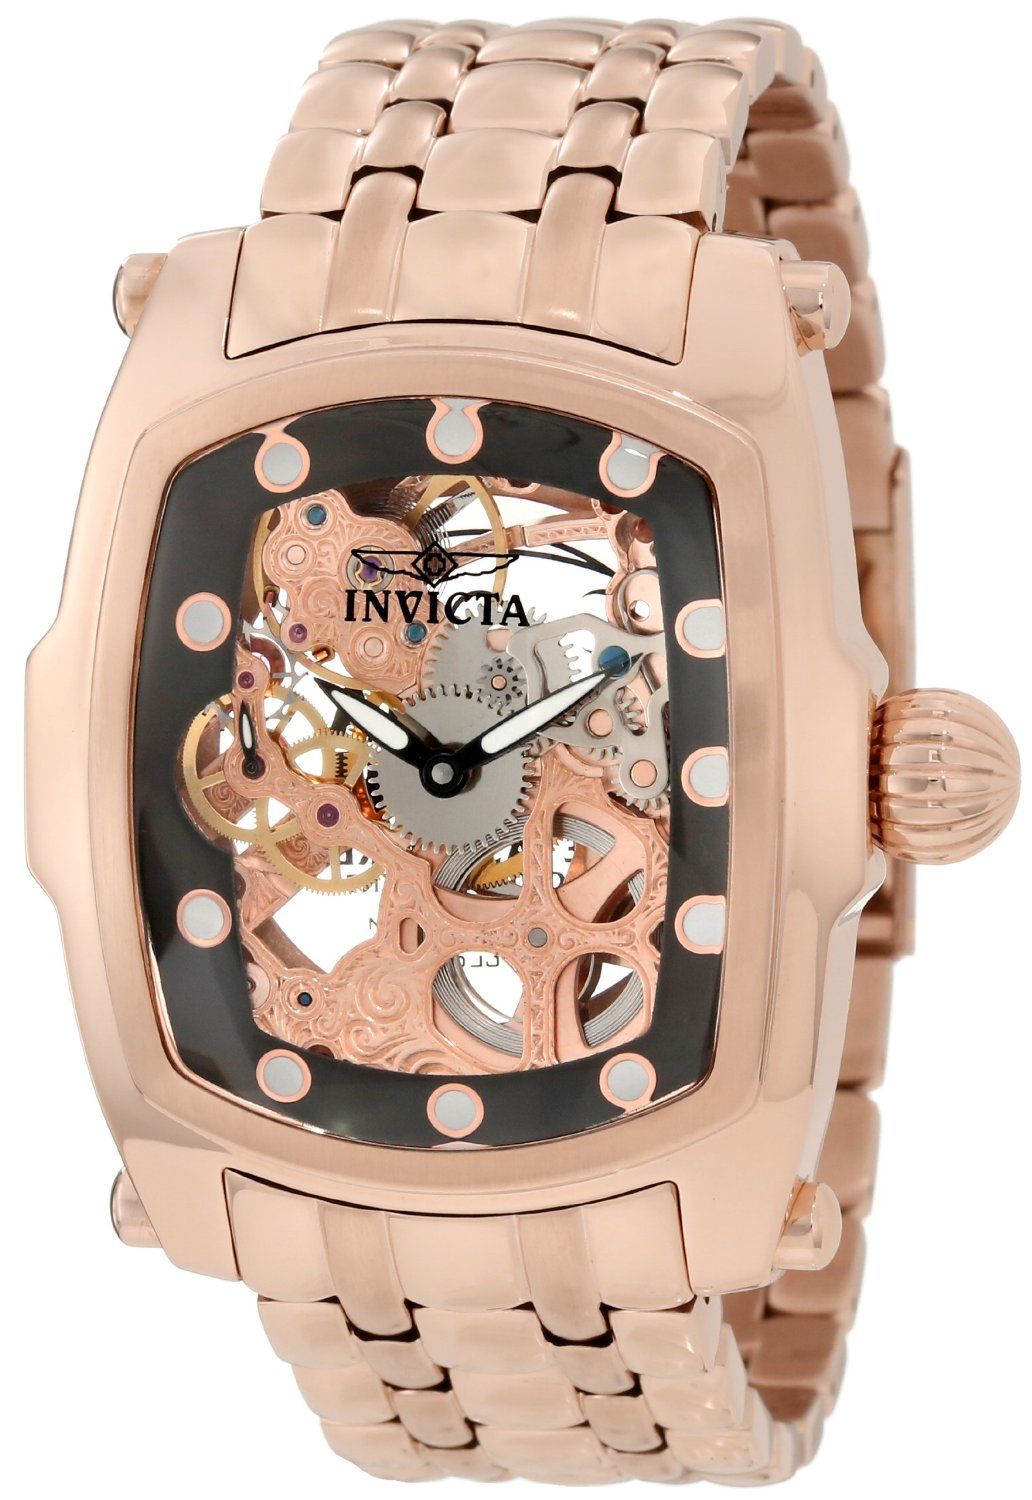 Invicta Men's 1093 Lupah Automatic Rose Gold Plated Wrist Watch